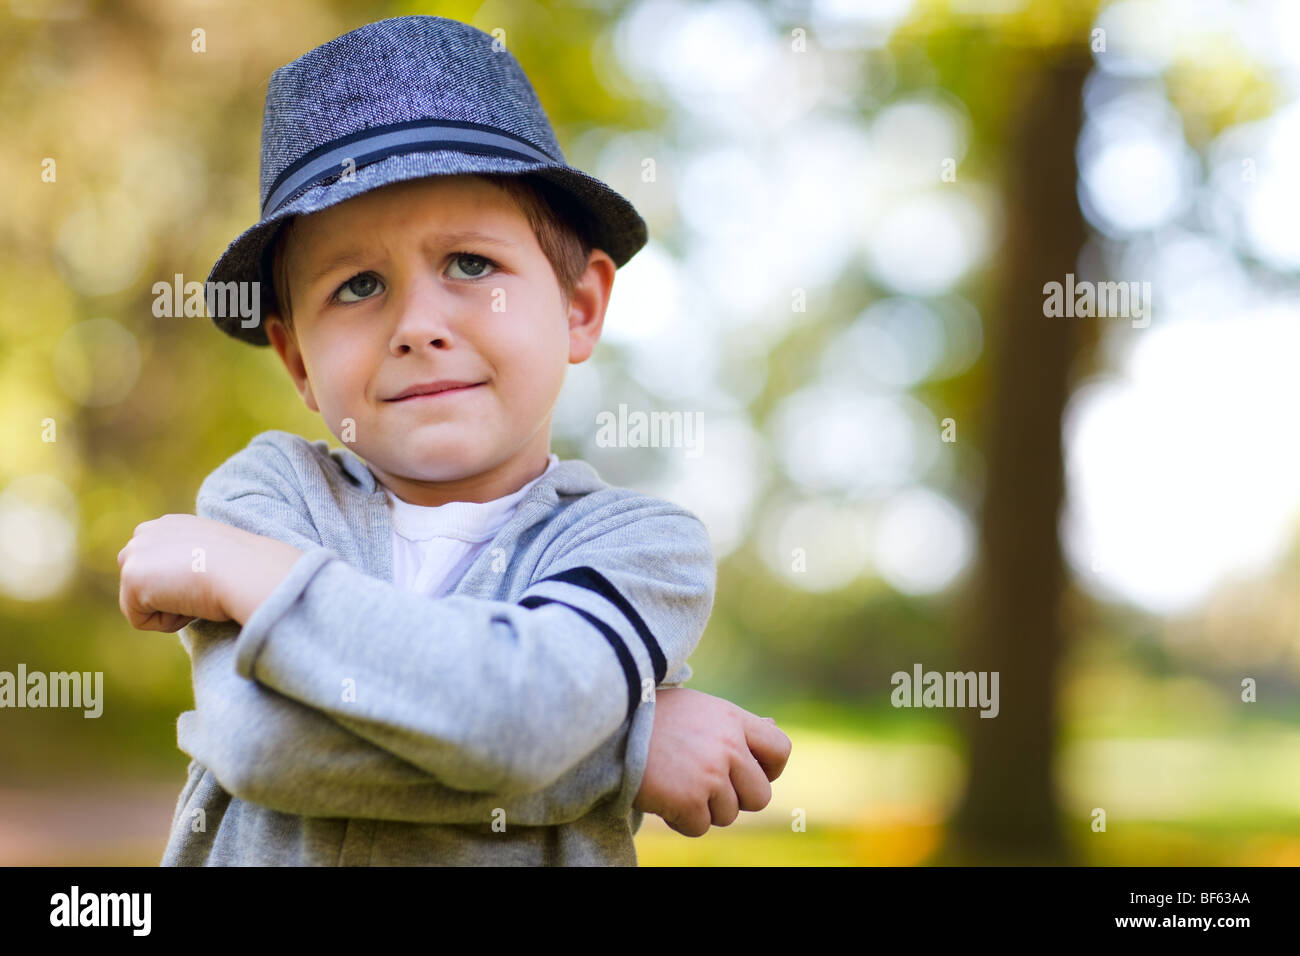 Stylish young 4 year old angry boy Stock Photo